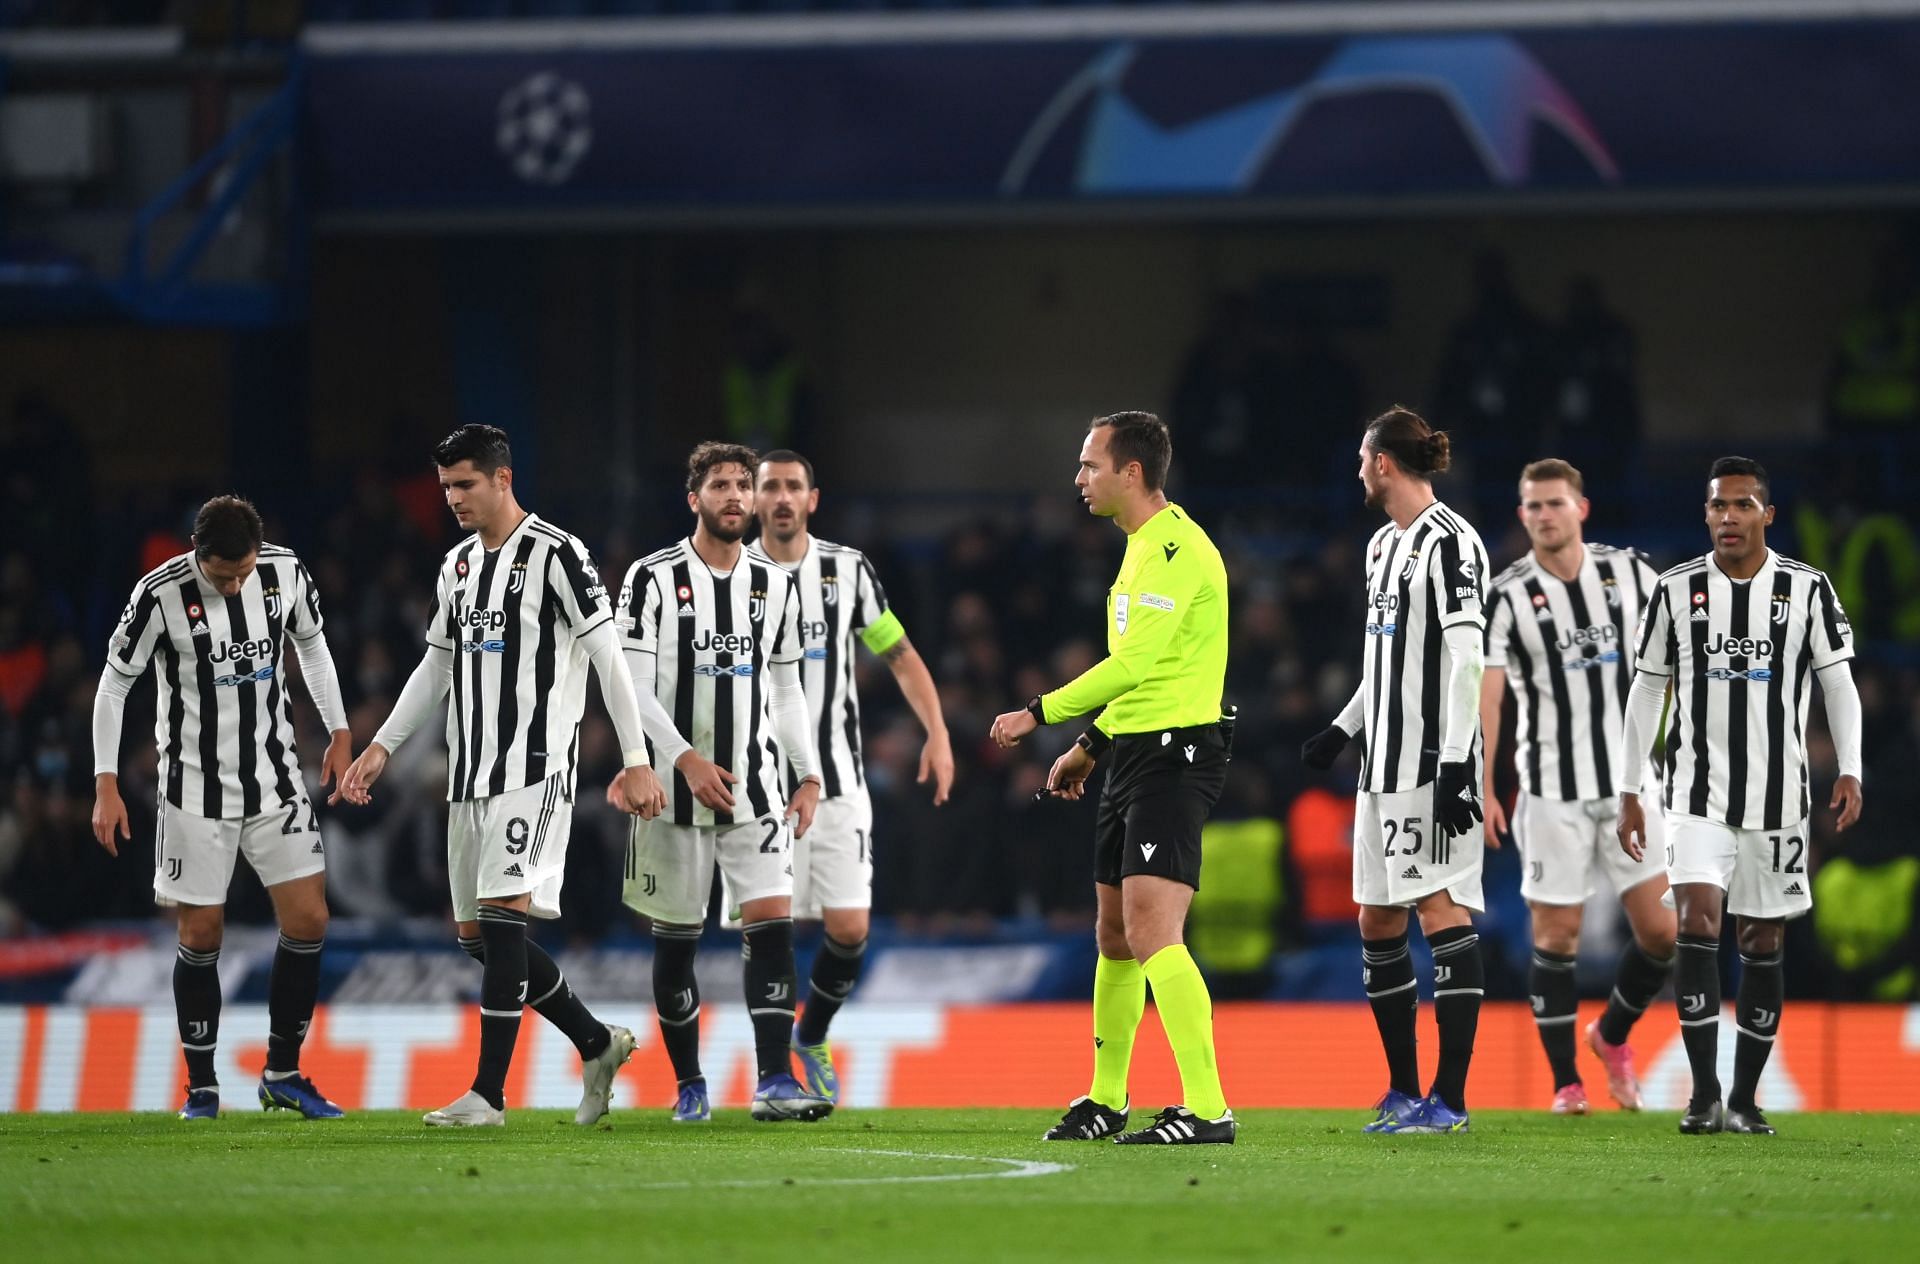 Juventus never found themselves in control during the game.